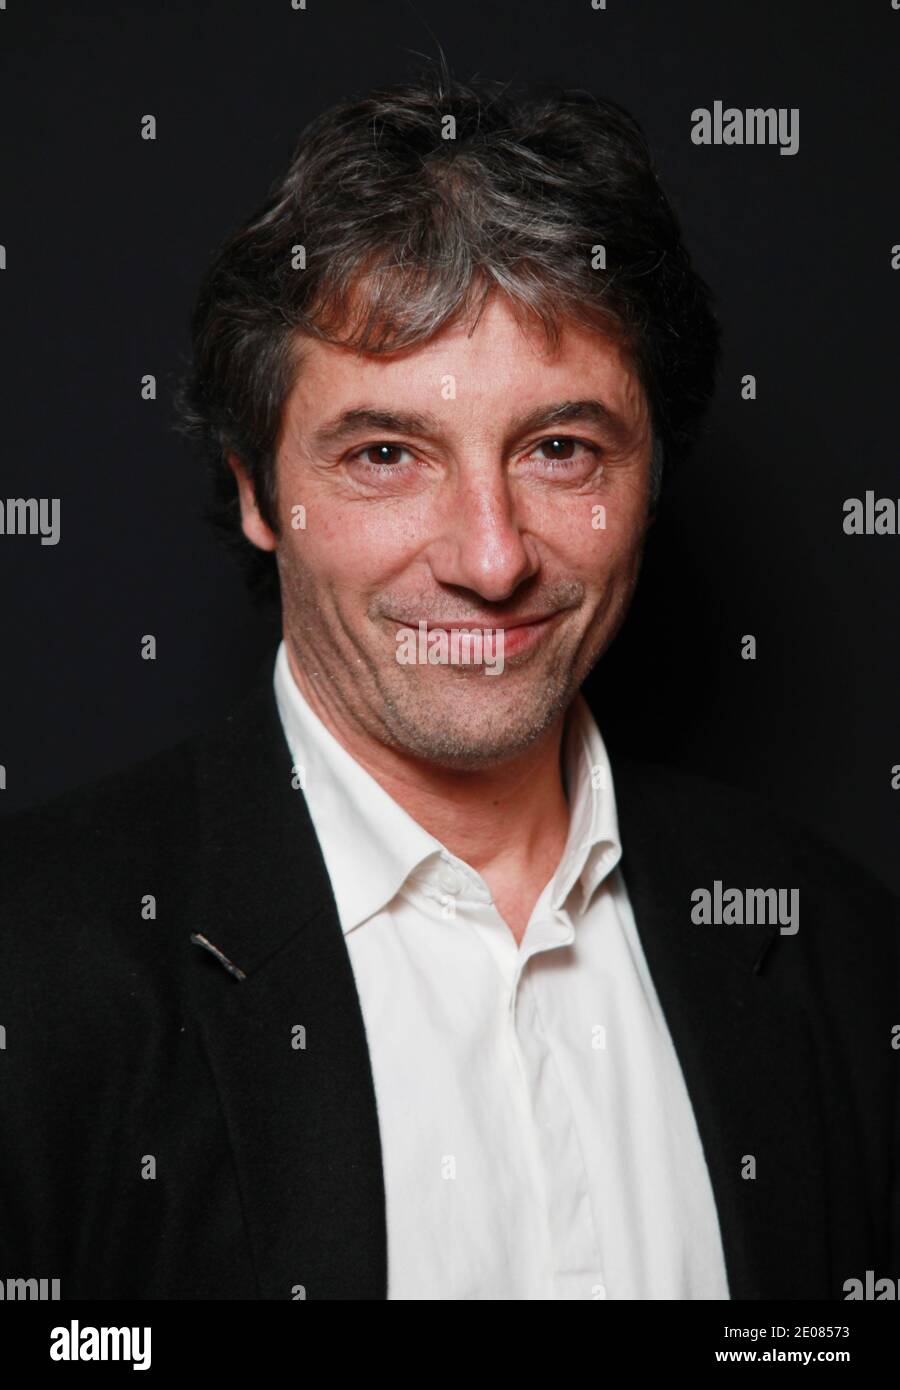 EXCLUSIVE. Marc Duret poses for our photographer during the 17th Lumieres ceremony awards in Paris, France on January 13, 2012. Photo by Denis Guignebourg/ABACAPRESS.COM? Stock Photo